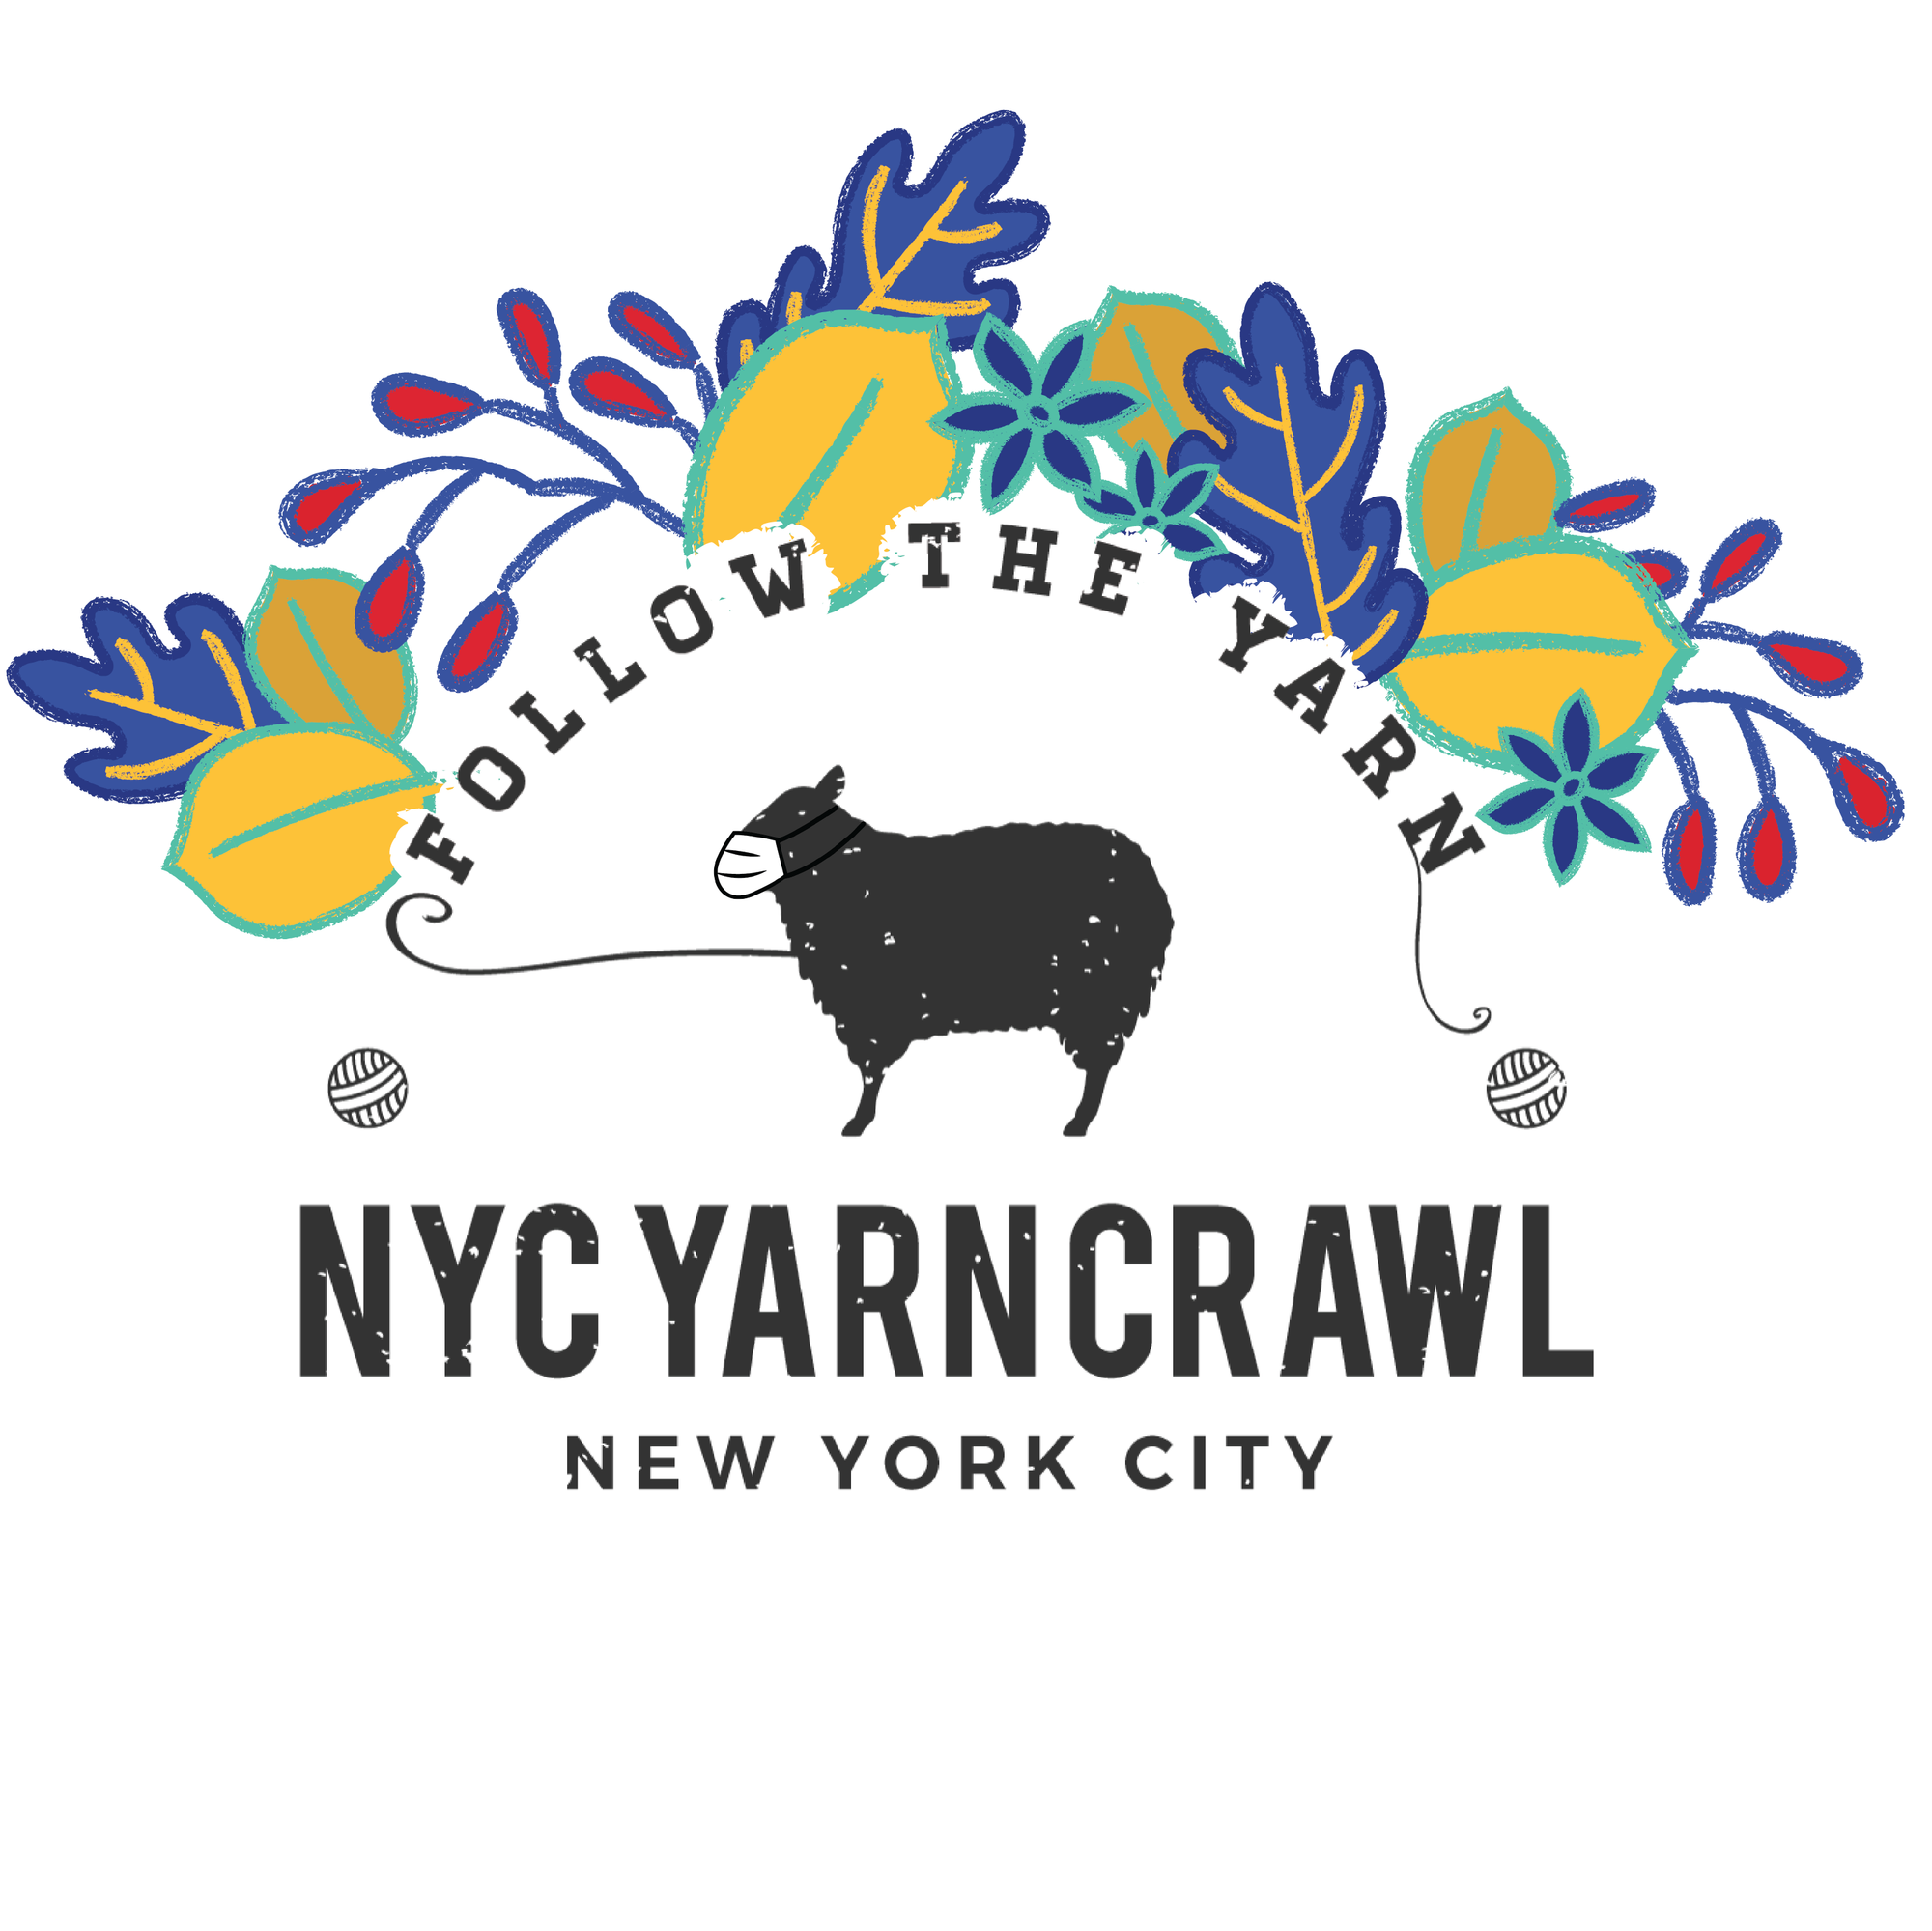 It's the NYC Yarn Crawl! Let's Go!